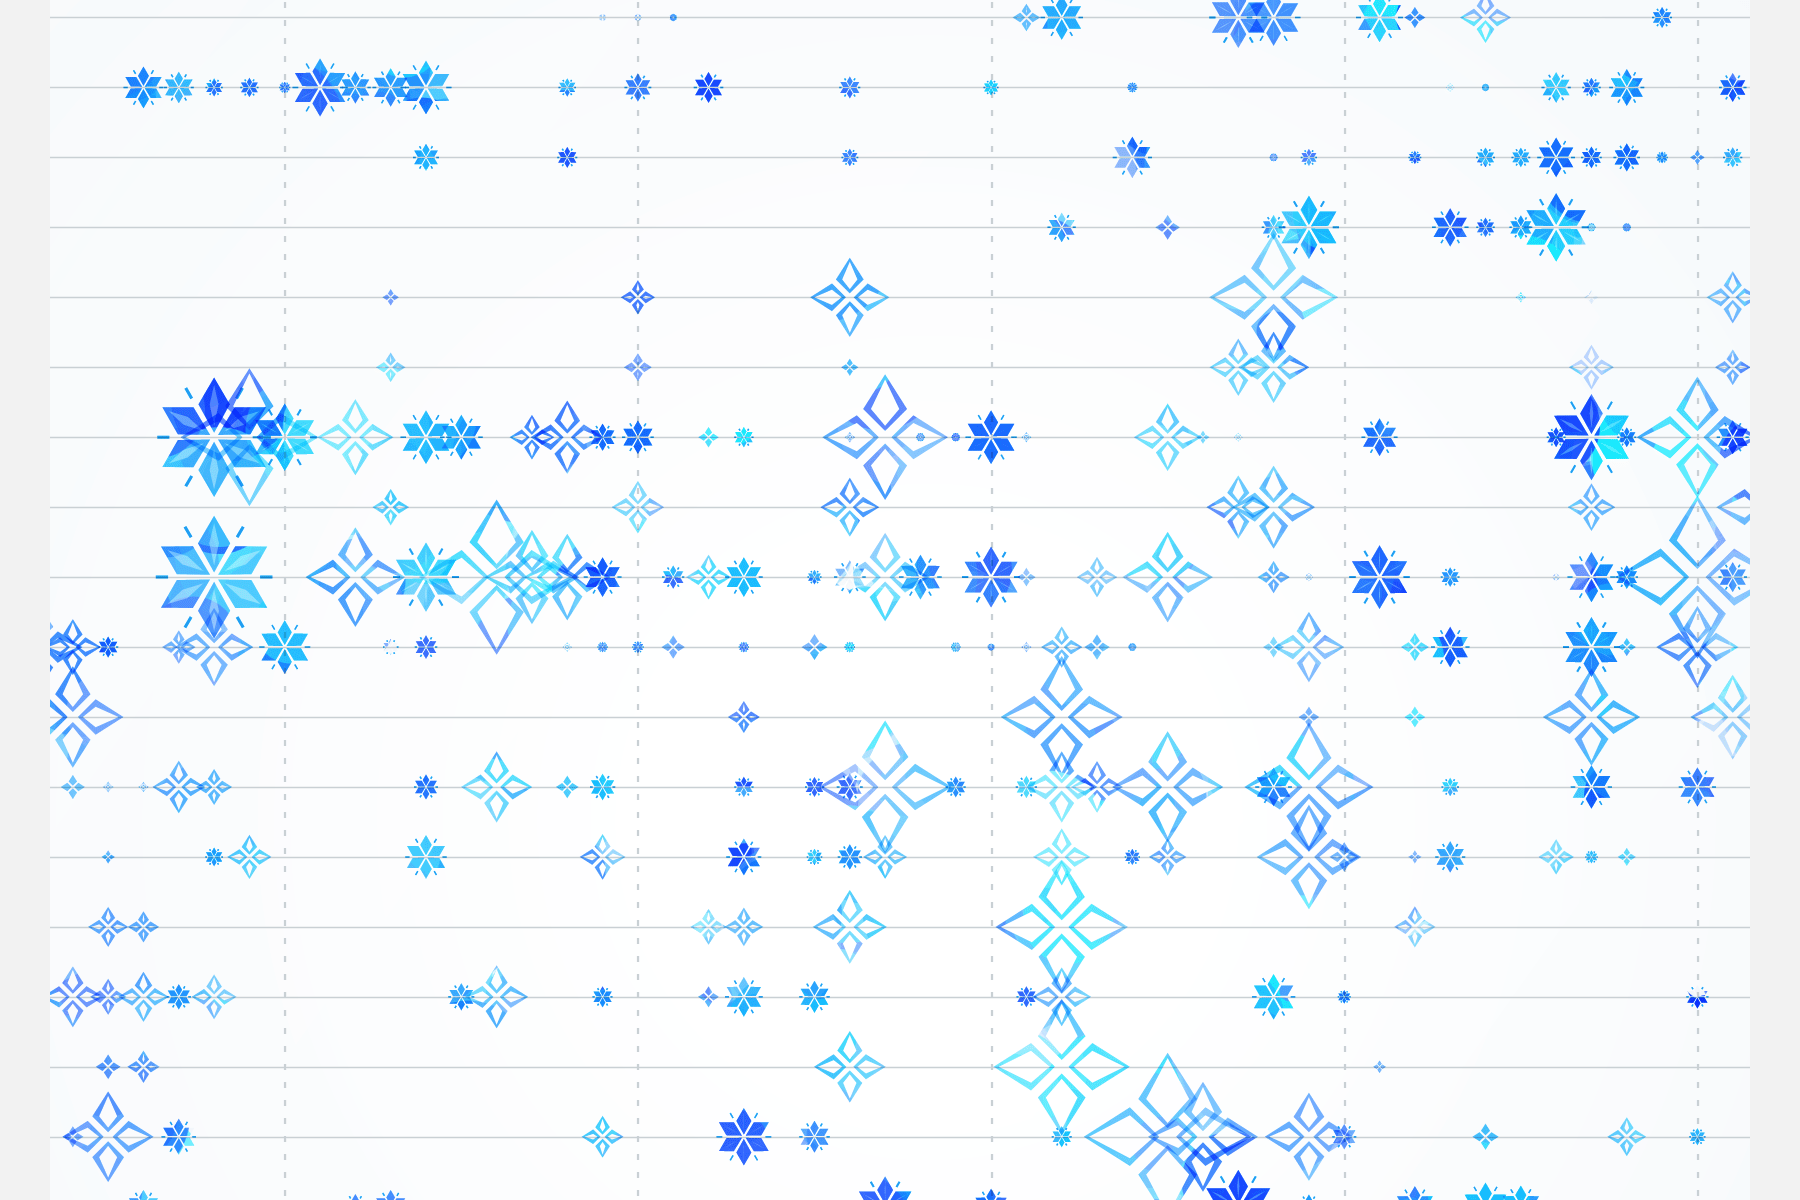 A detail of the snowflakes on the left page of the Christmas Card